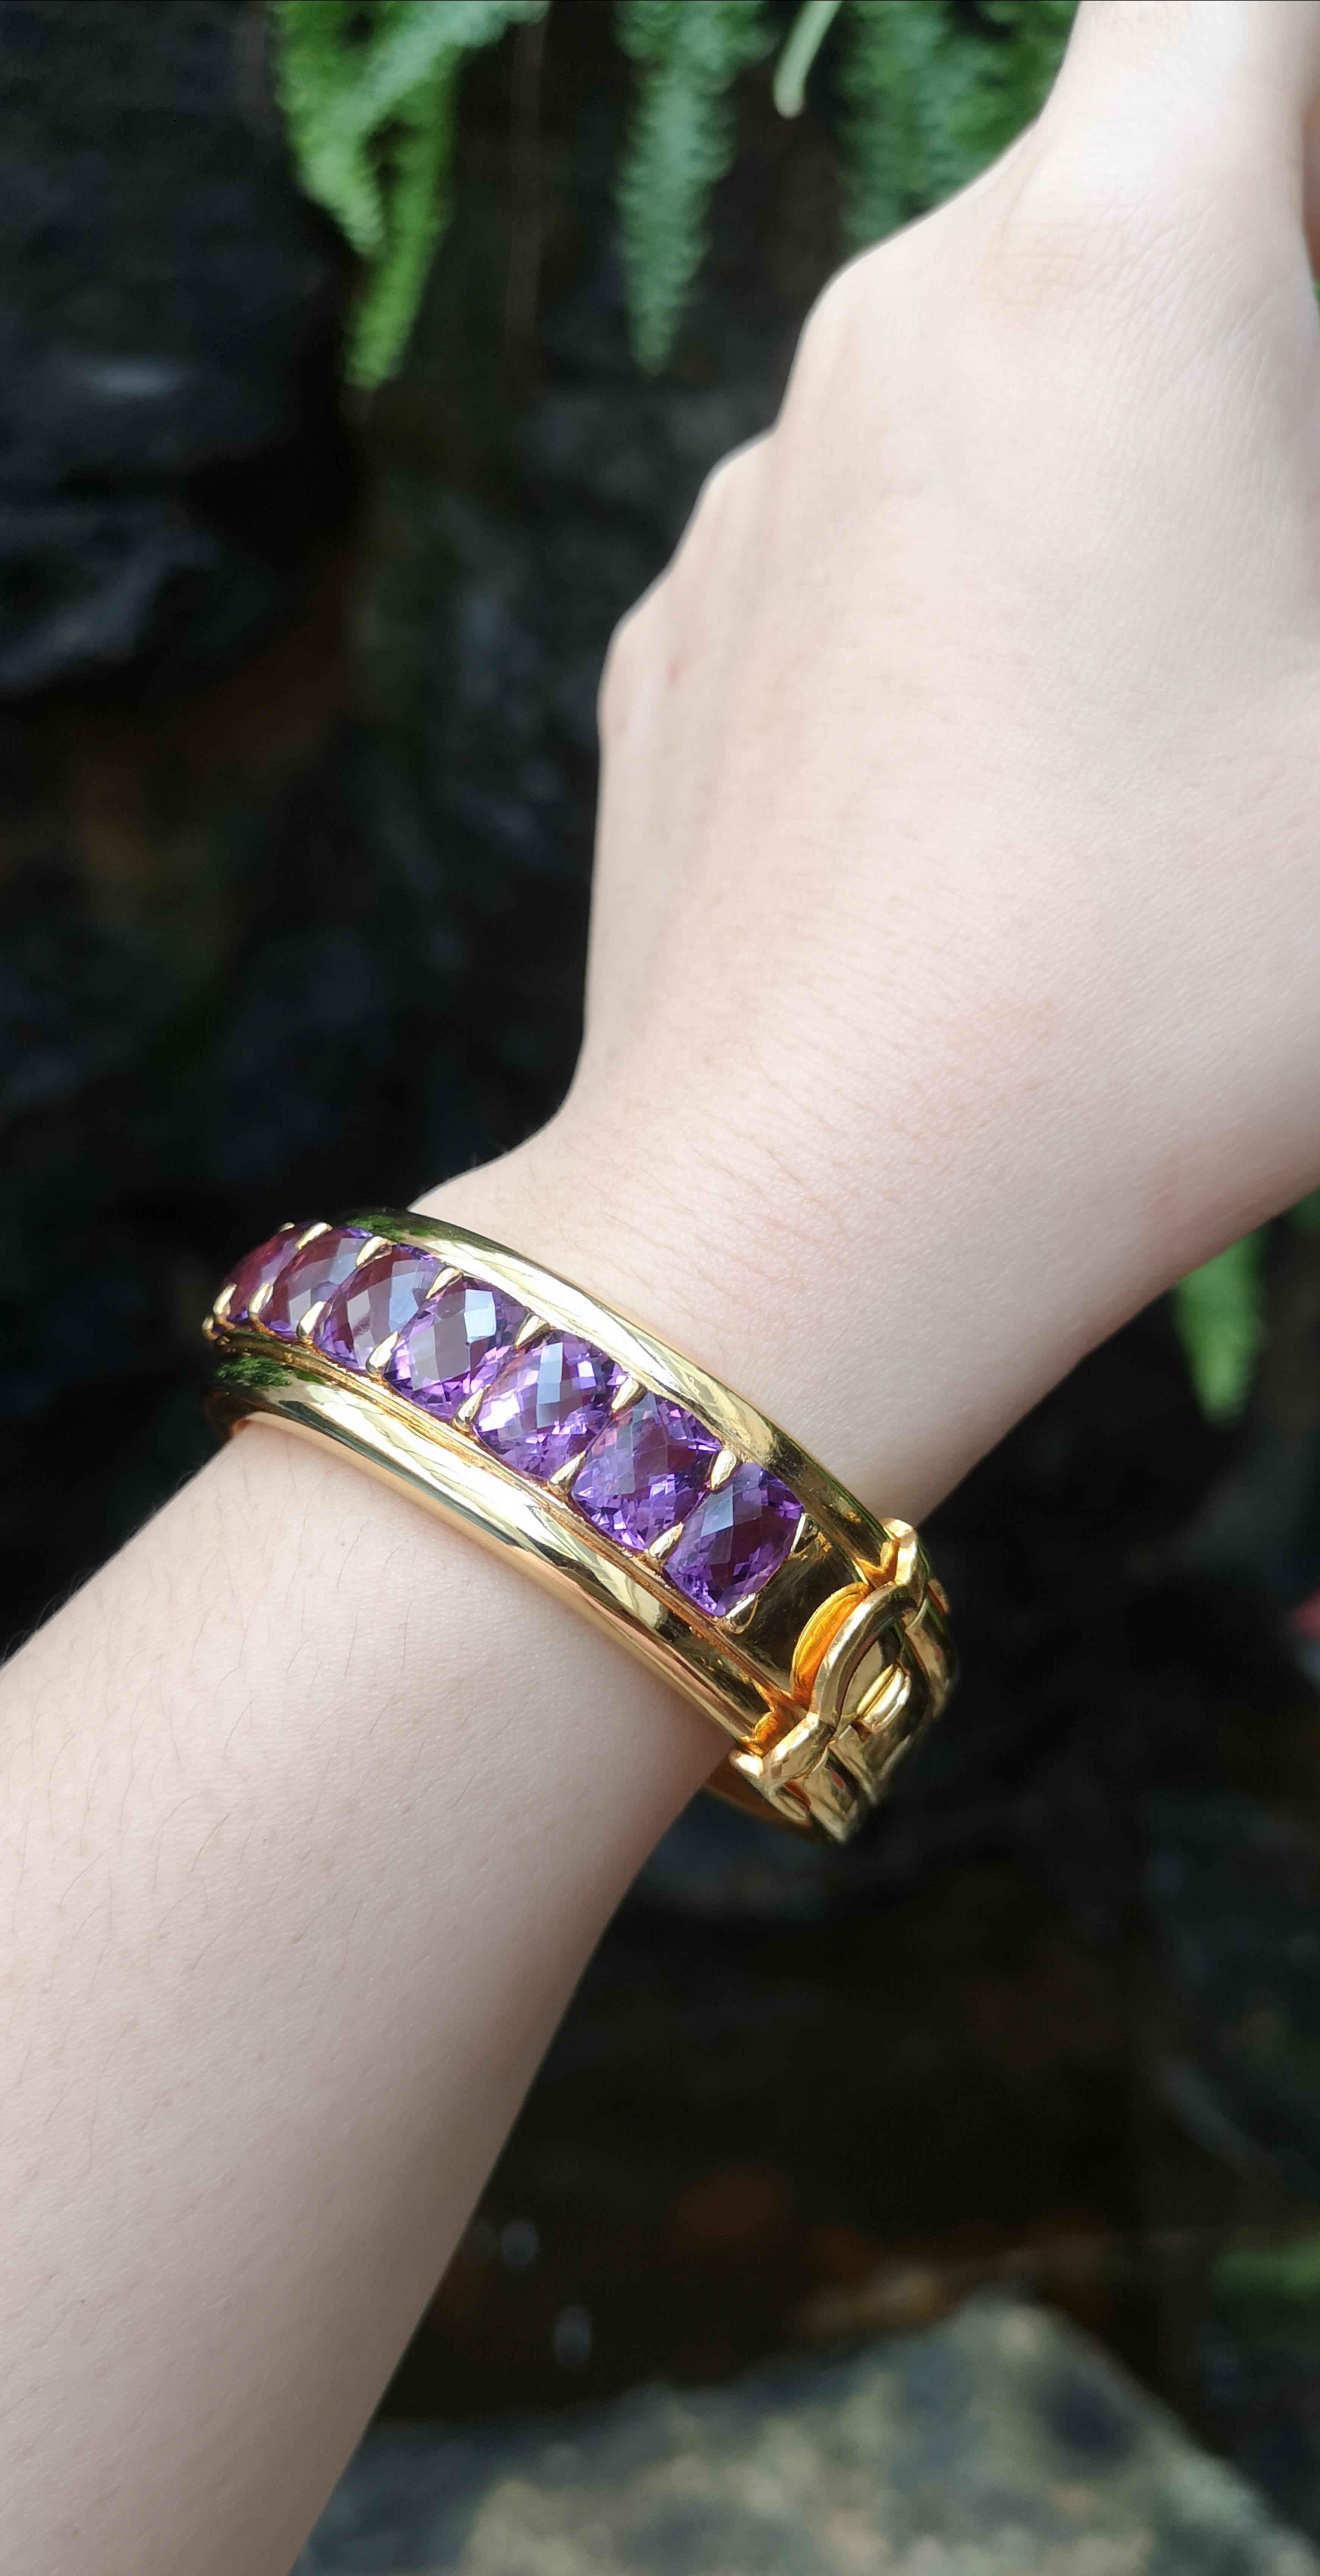 Amethyst 29.64 carats Bangle set in Silver Settings

Diameter:  6.4 cm 
Length: 2.0 cm
Total Weight: 62.5  grams

*Please note that the silver setting is plated with gold to promote shine and help prevent oxidation.  However, with the nature of